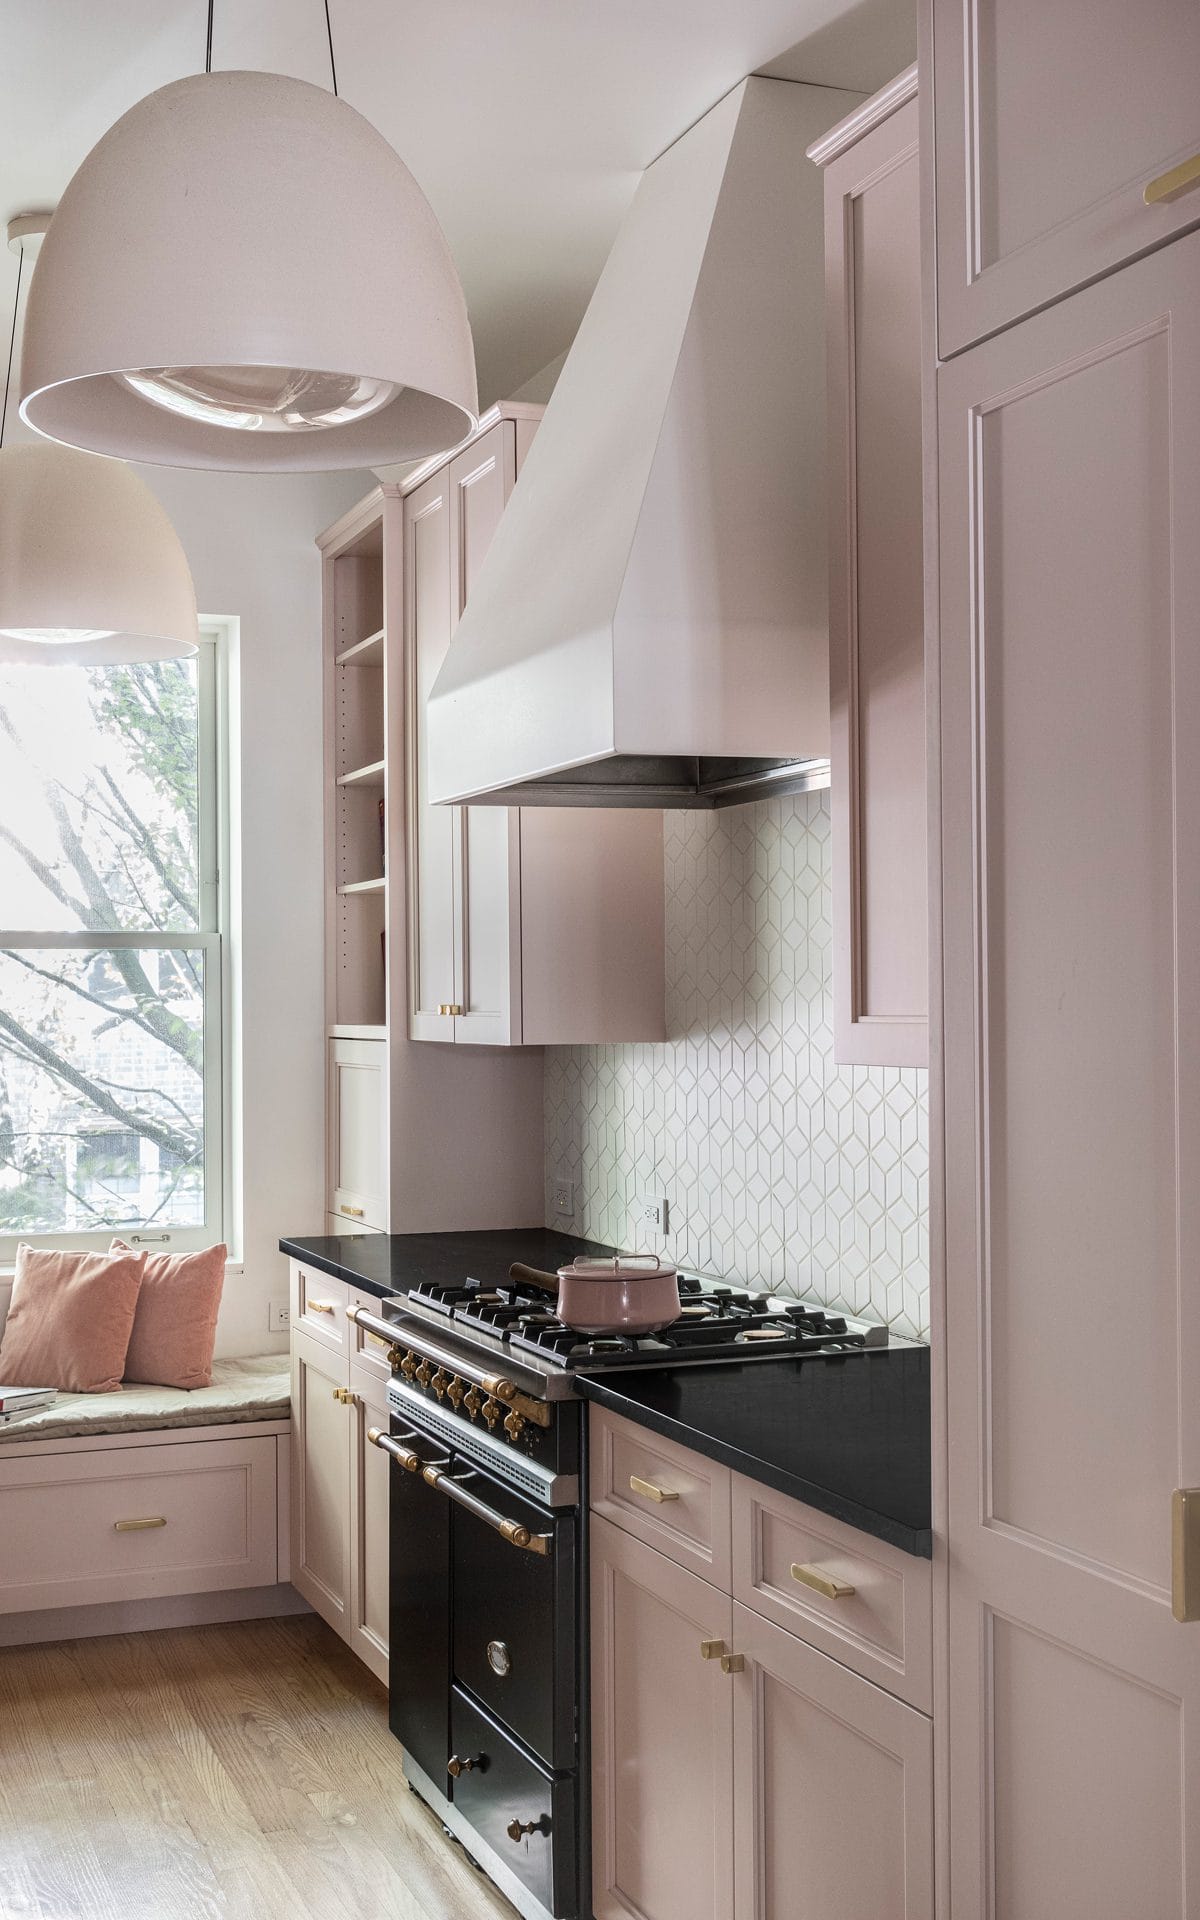 Classic kitchen with pale pink cabinetry, custom hood vent, classic white backsplash and large pendant lights.